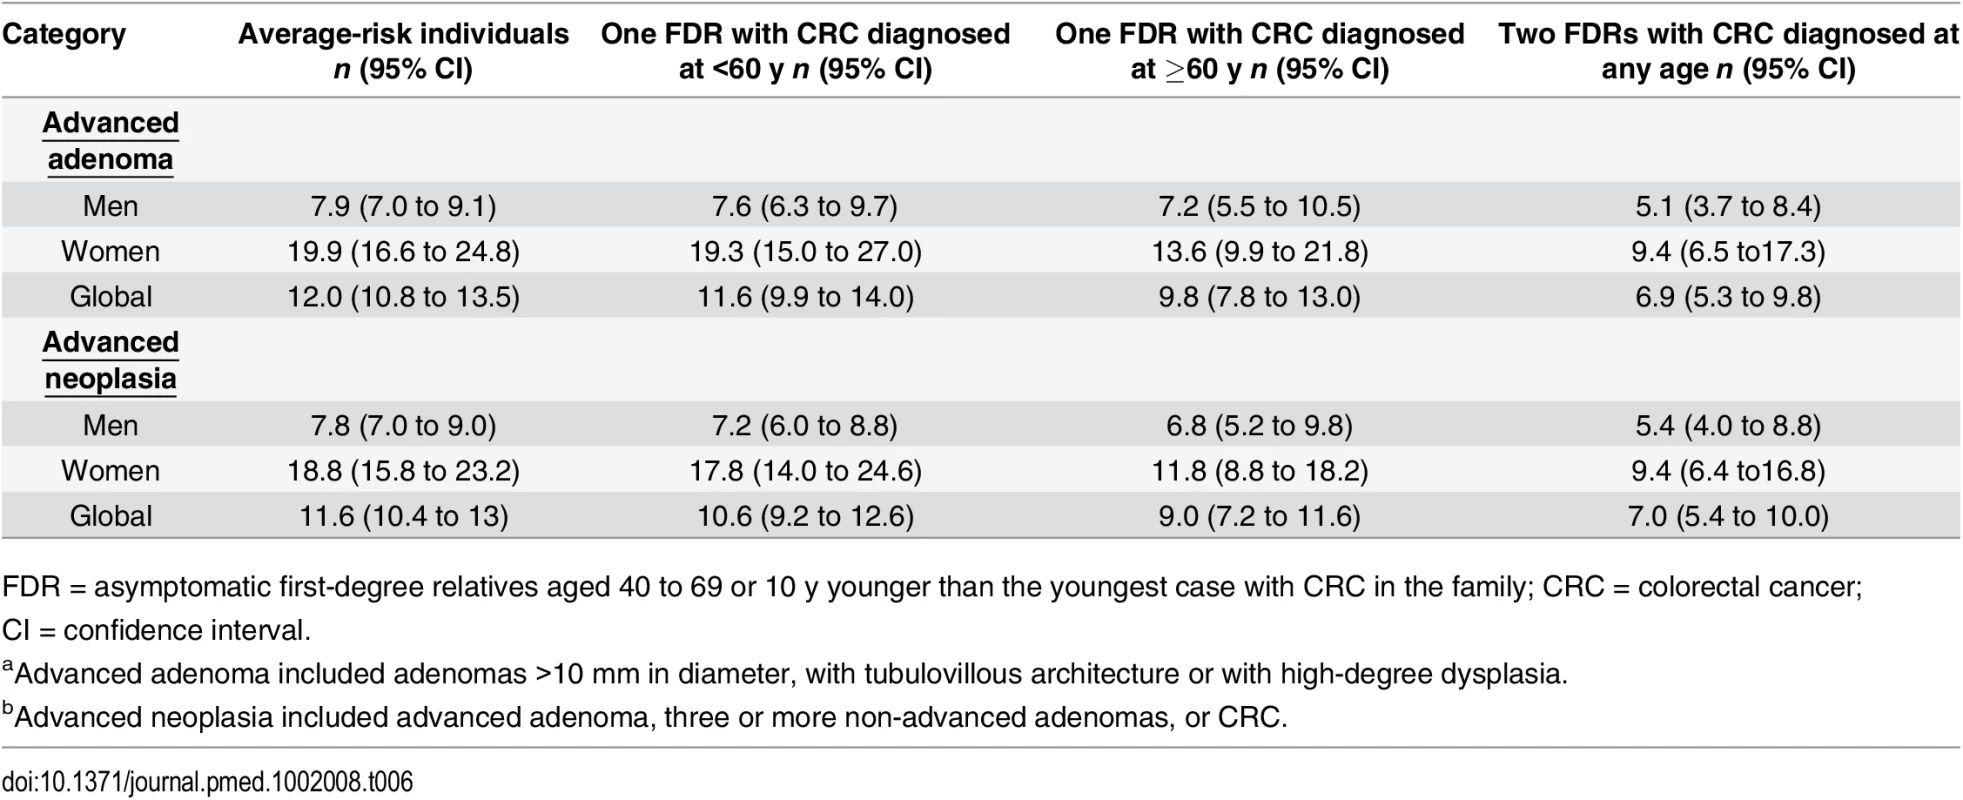 Number of colonoscopies needed to detect one advanced adenoma<em class=&quot;ref&quot;><sup>a</sup></em> and one advanced neoplasia<em class=&quot;ref&quot;><sup>b</sup></em> according to familial risk.